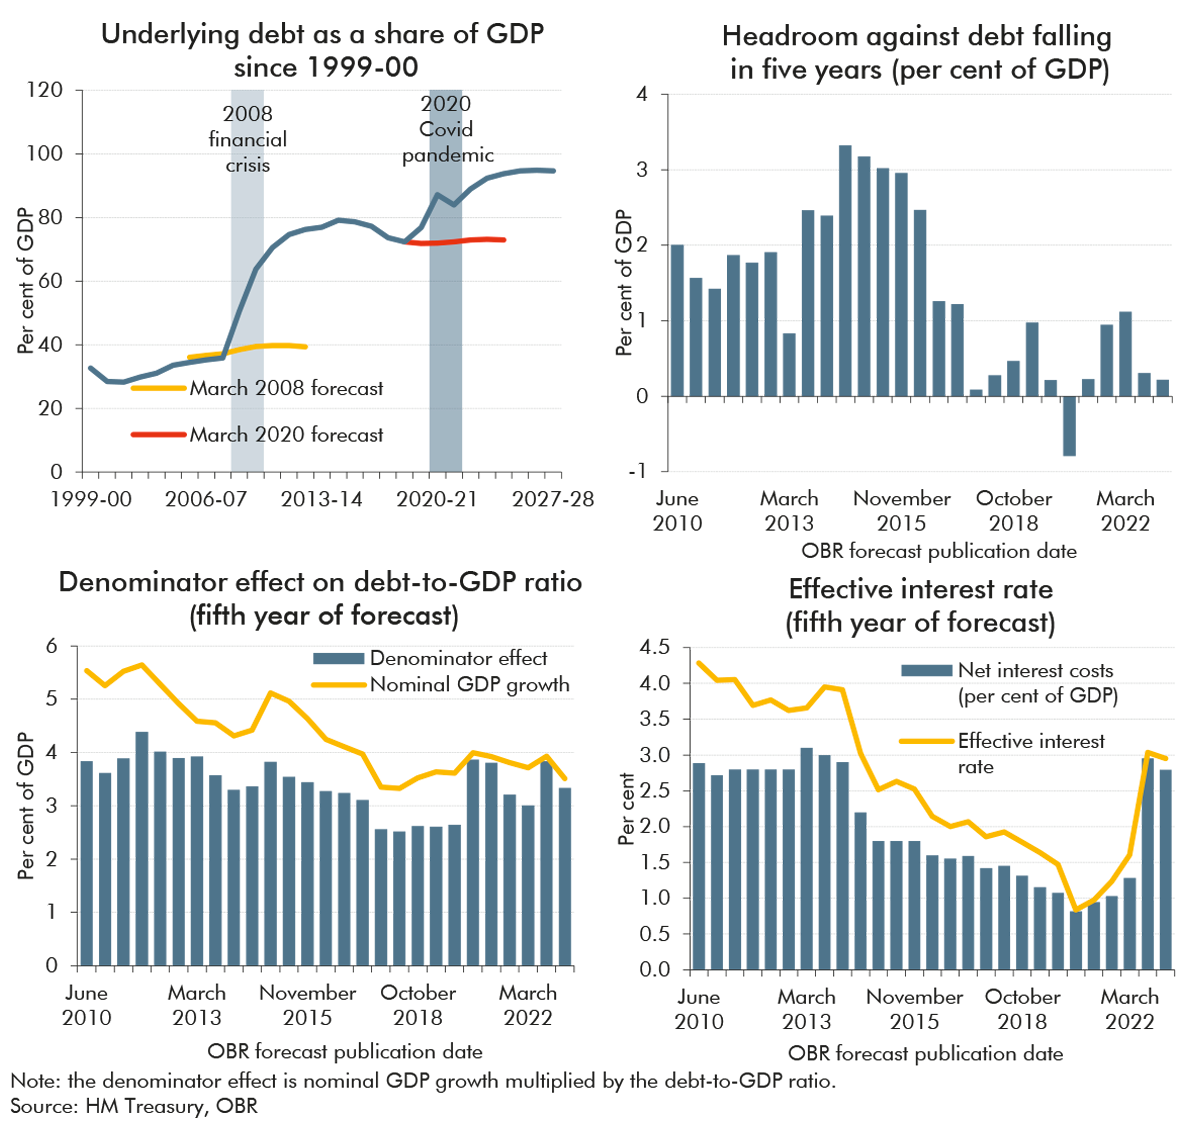 Chart A: Challenges in getting debt to fall as a share of GDP